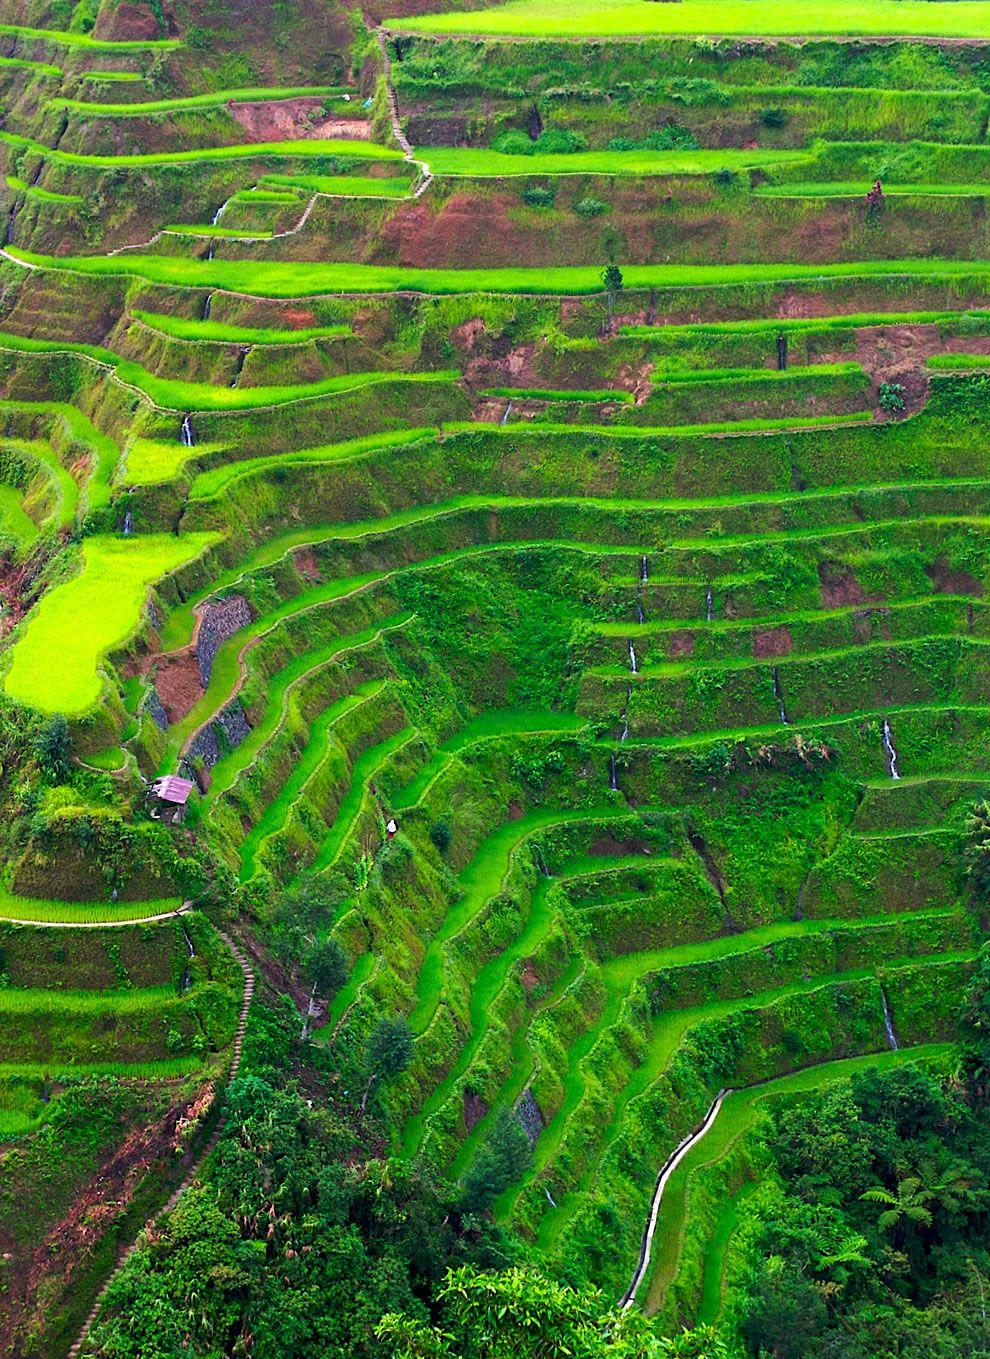 The rice terrace fields of Banaue country, the Philippines place